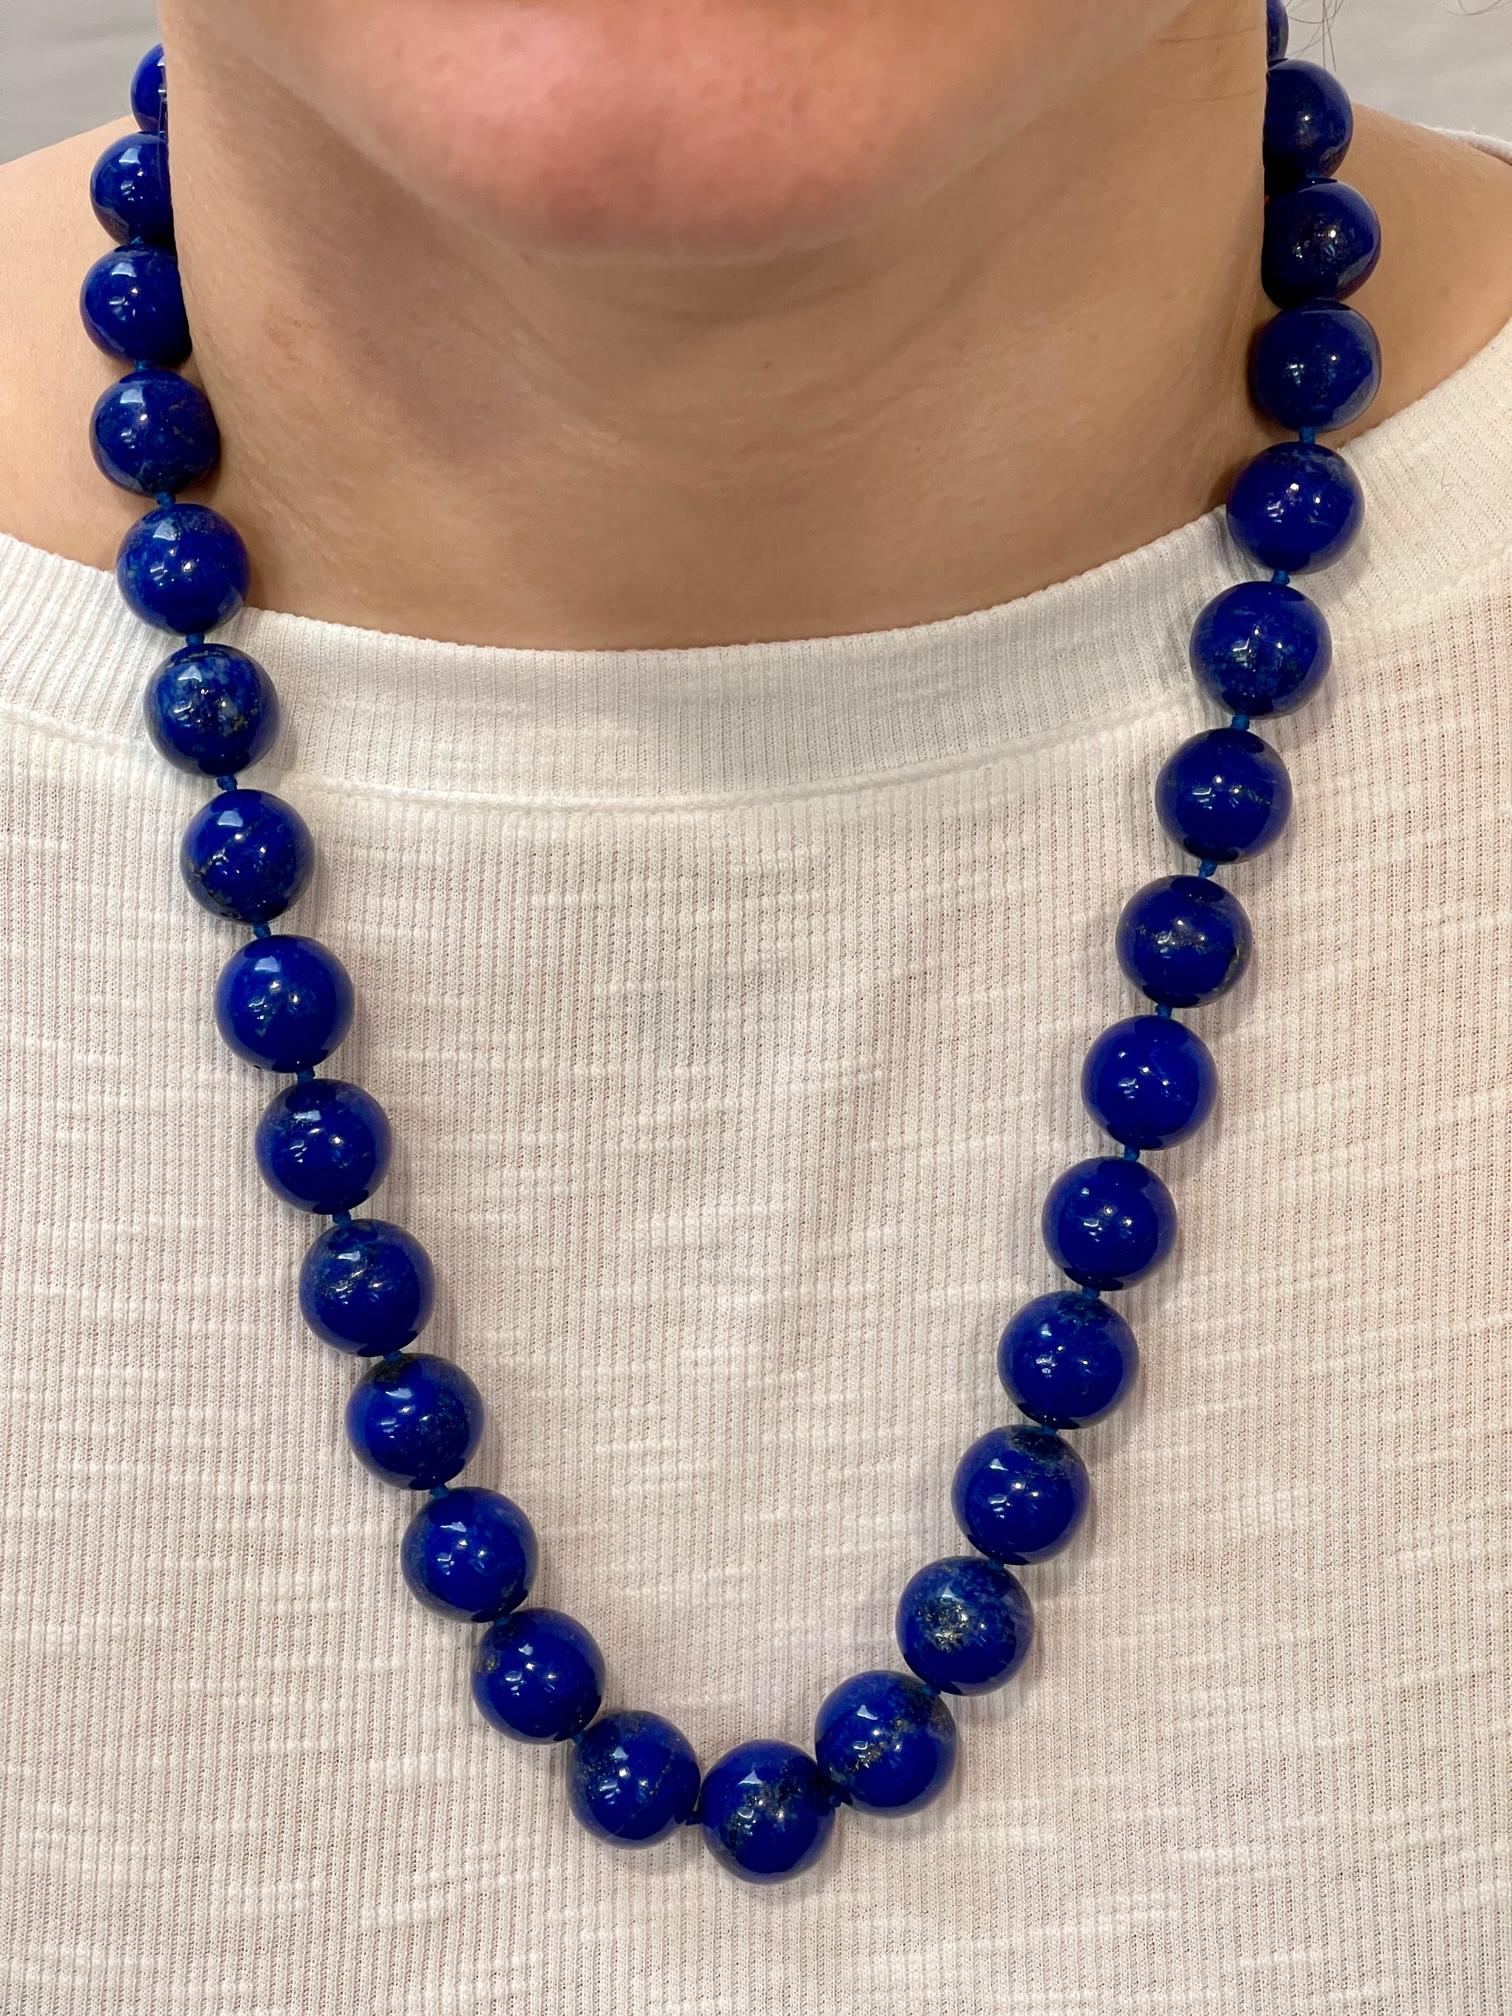 Vintage Lapis Lazuli Single Strand Necklace with 14 Karat Yellow Gold Lobster For Sale 10